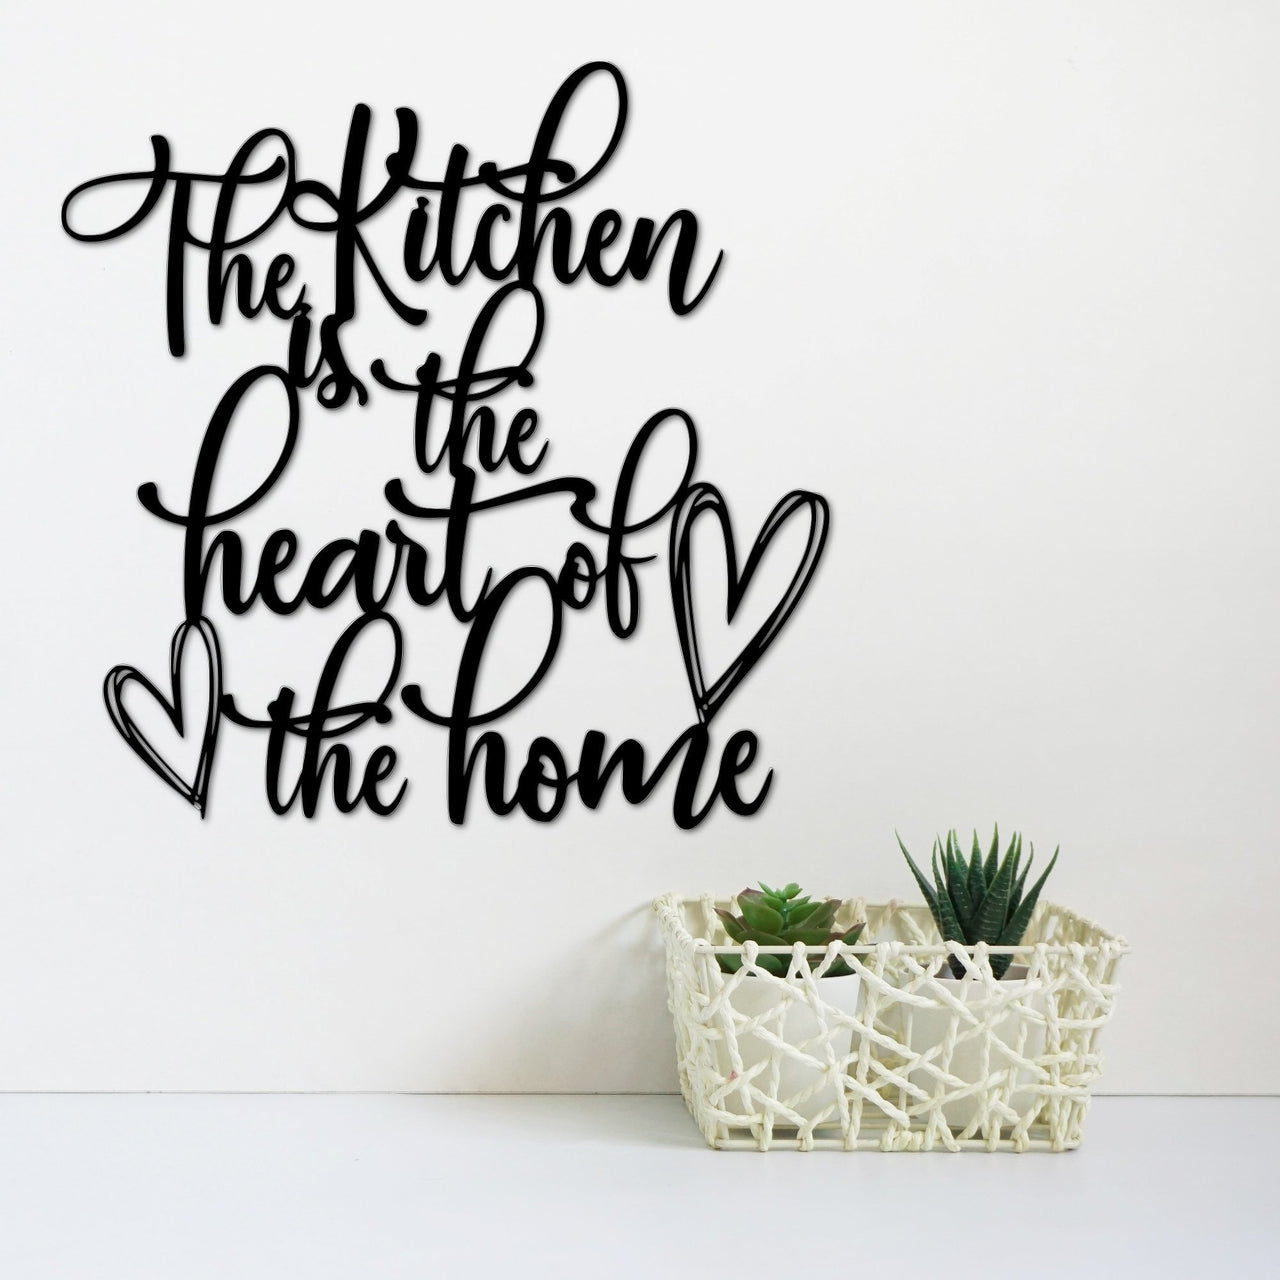 The Kitchen is the Heart of the Home | Metal Kitchen Sign | Decorative Wall Art | Gift for Mom | Housewarming Gift for Kitchen